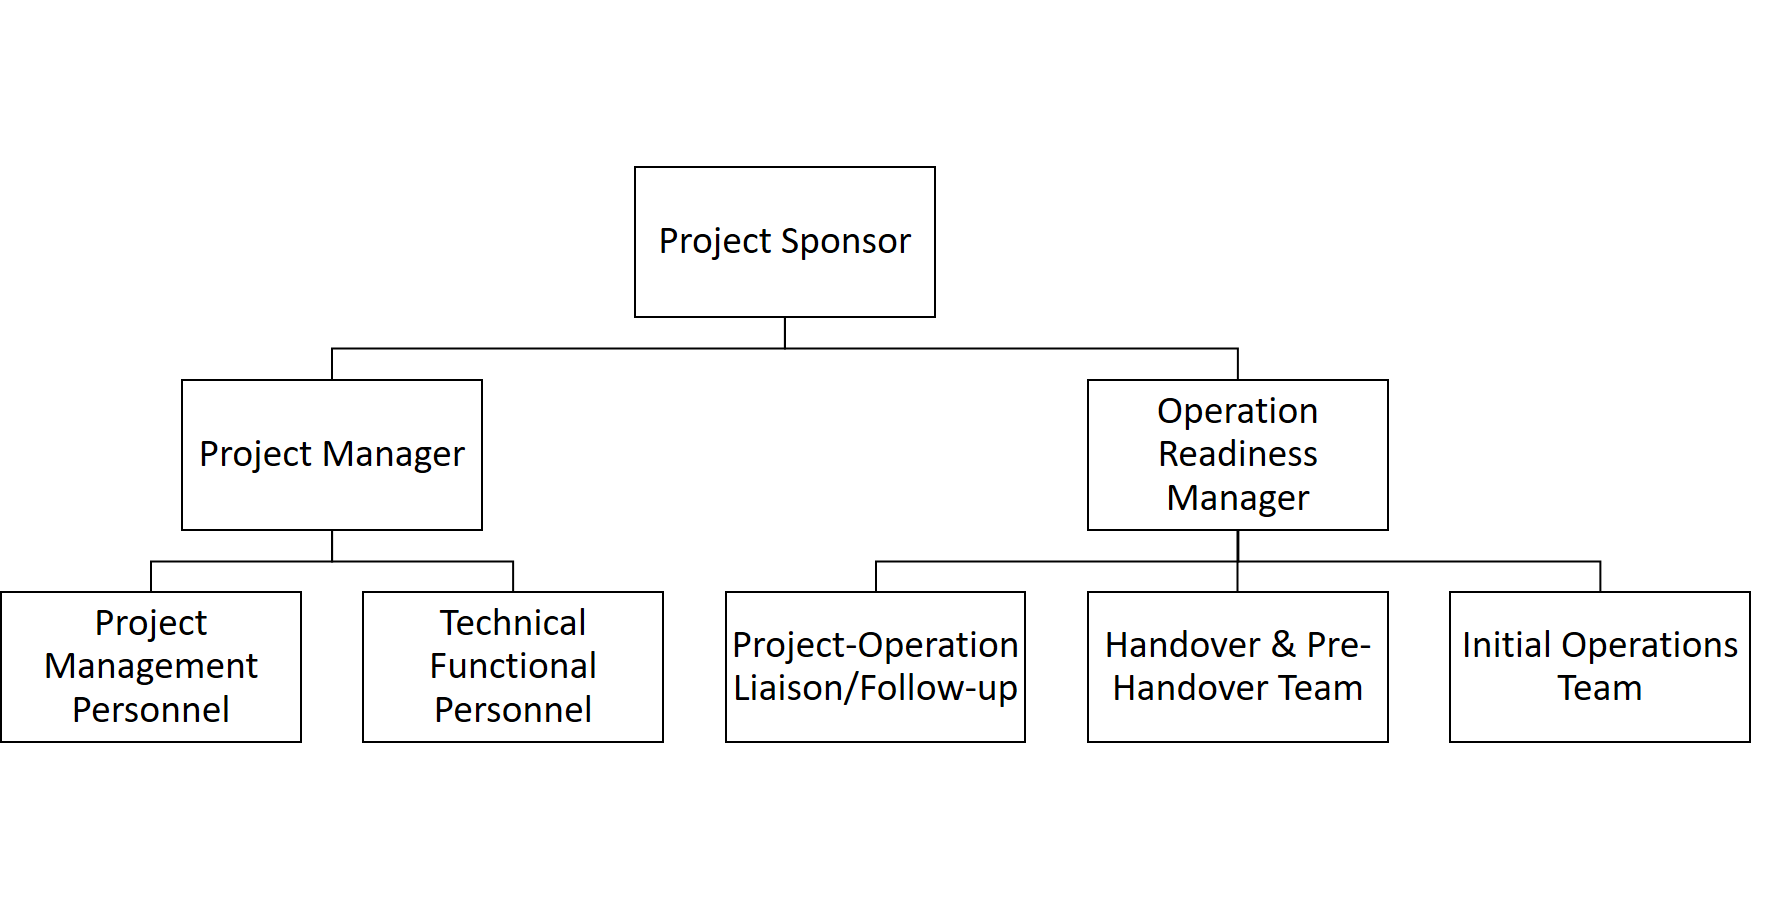 The Extended Project Team